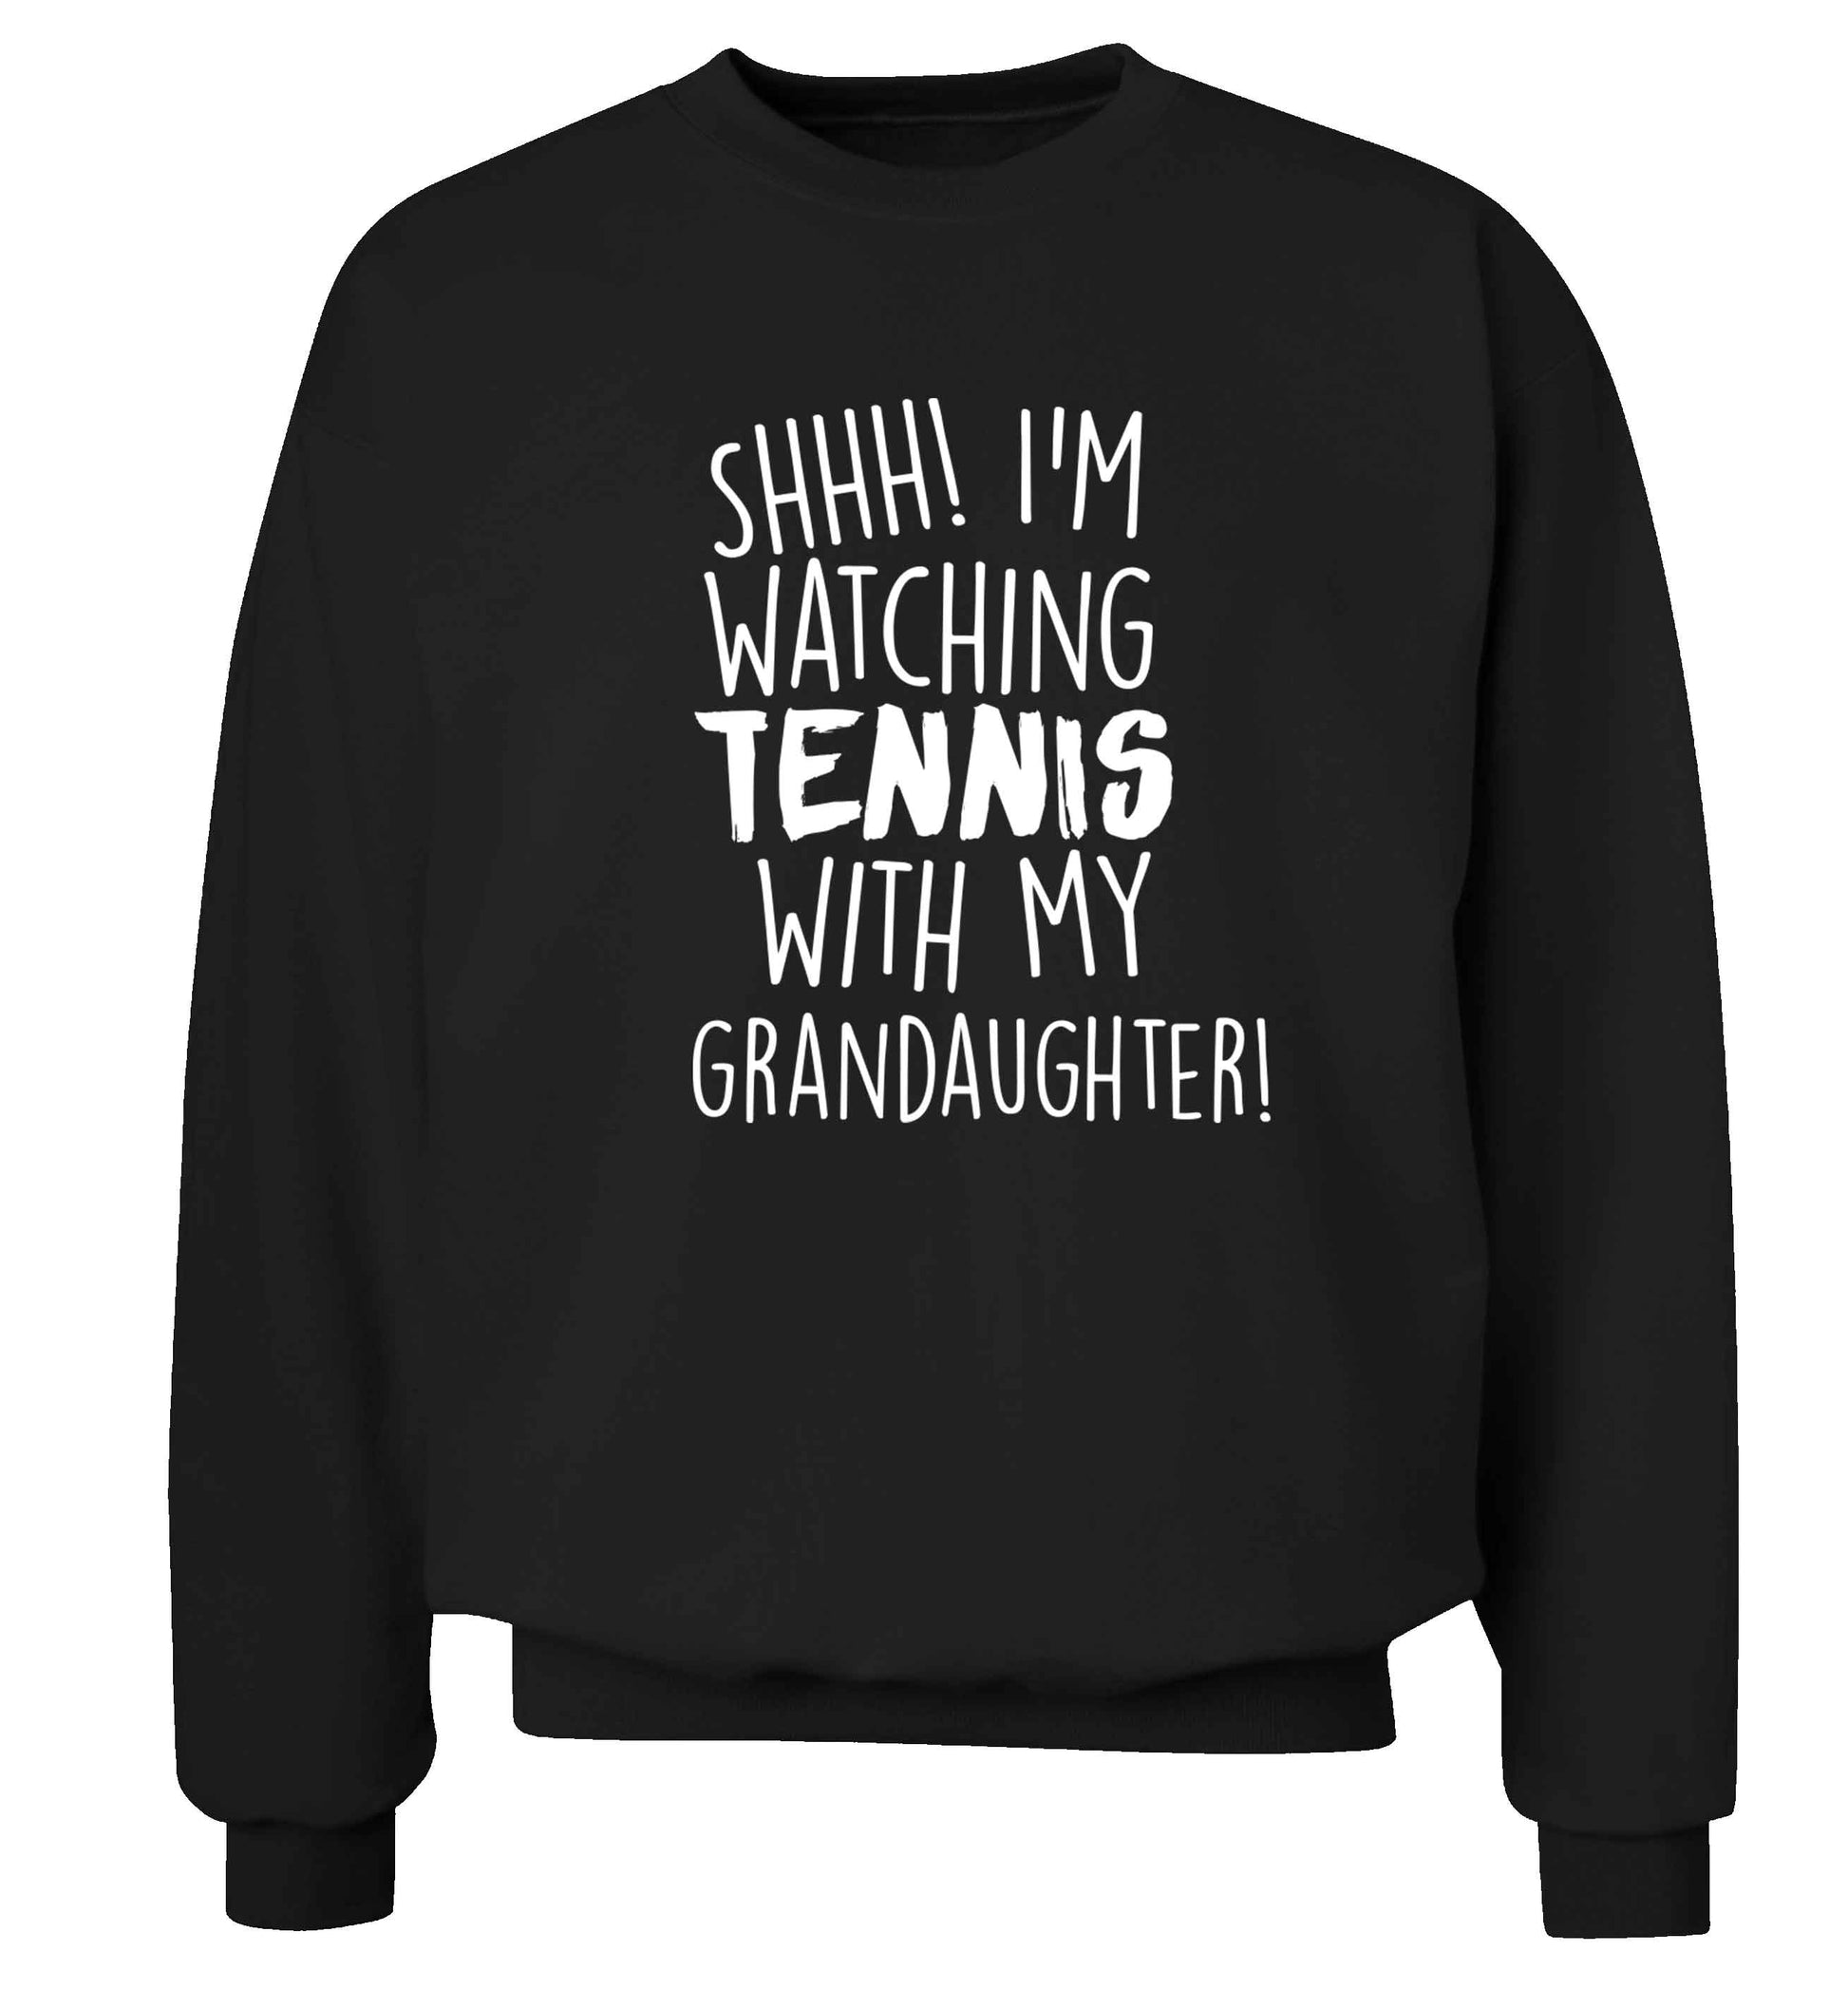 Shh! I'm watching tennis with my granddaughter! Adult's unisex black Sweater 2XL